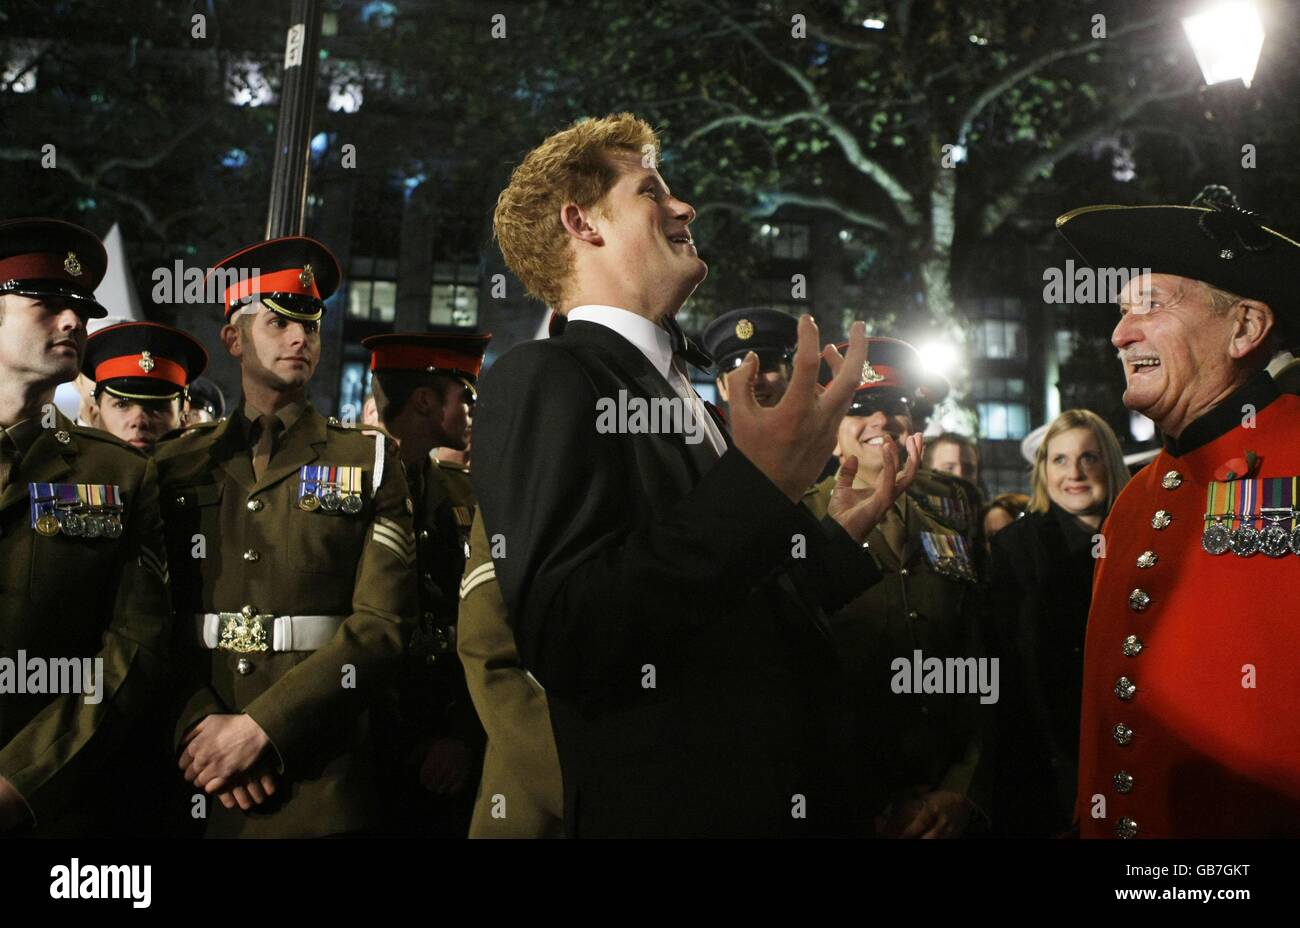 Britain's Prince Harry, center, jokes with Chelsea Pensioner Stan Pepper, right, as he meets military service personnel upon his arrival for the world premiere of the James Bond film 'Quantum of Solace' at a cinema in London. Stock Photo